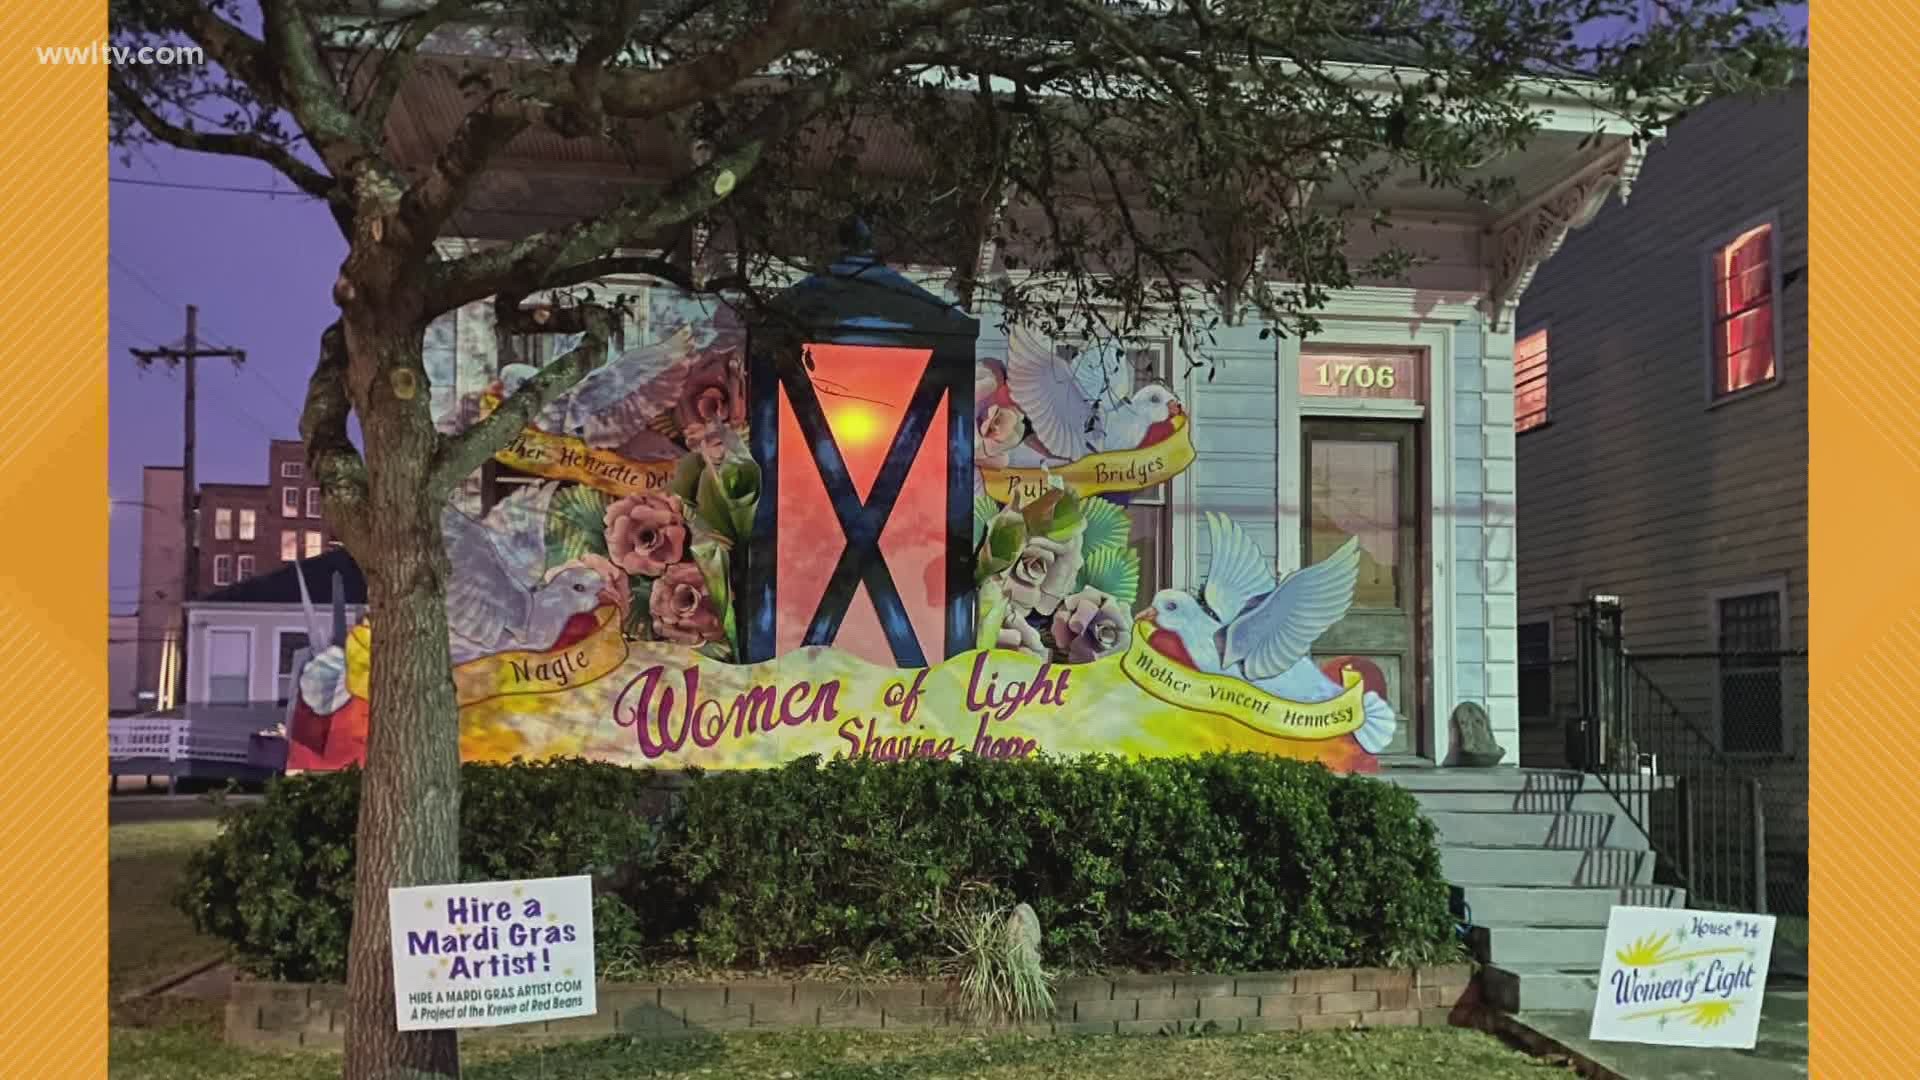 Two catholic sisters have created a very inspirational Mardi Gras house float.